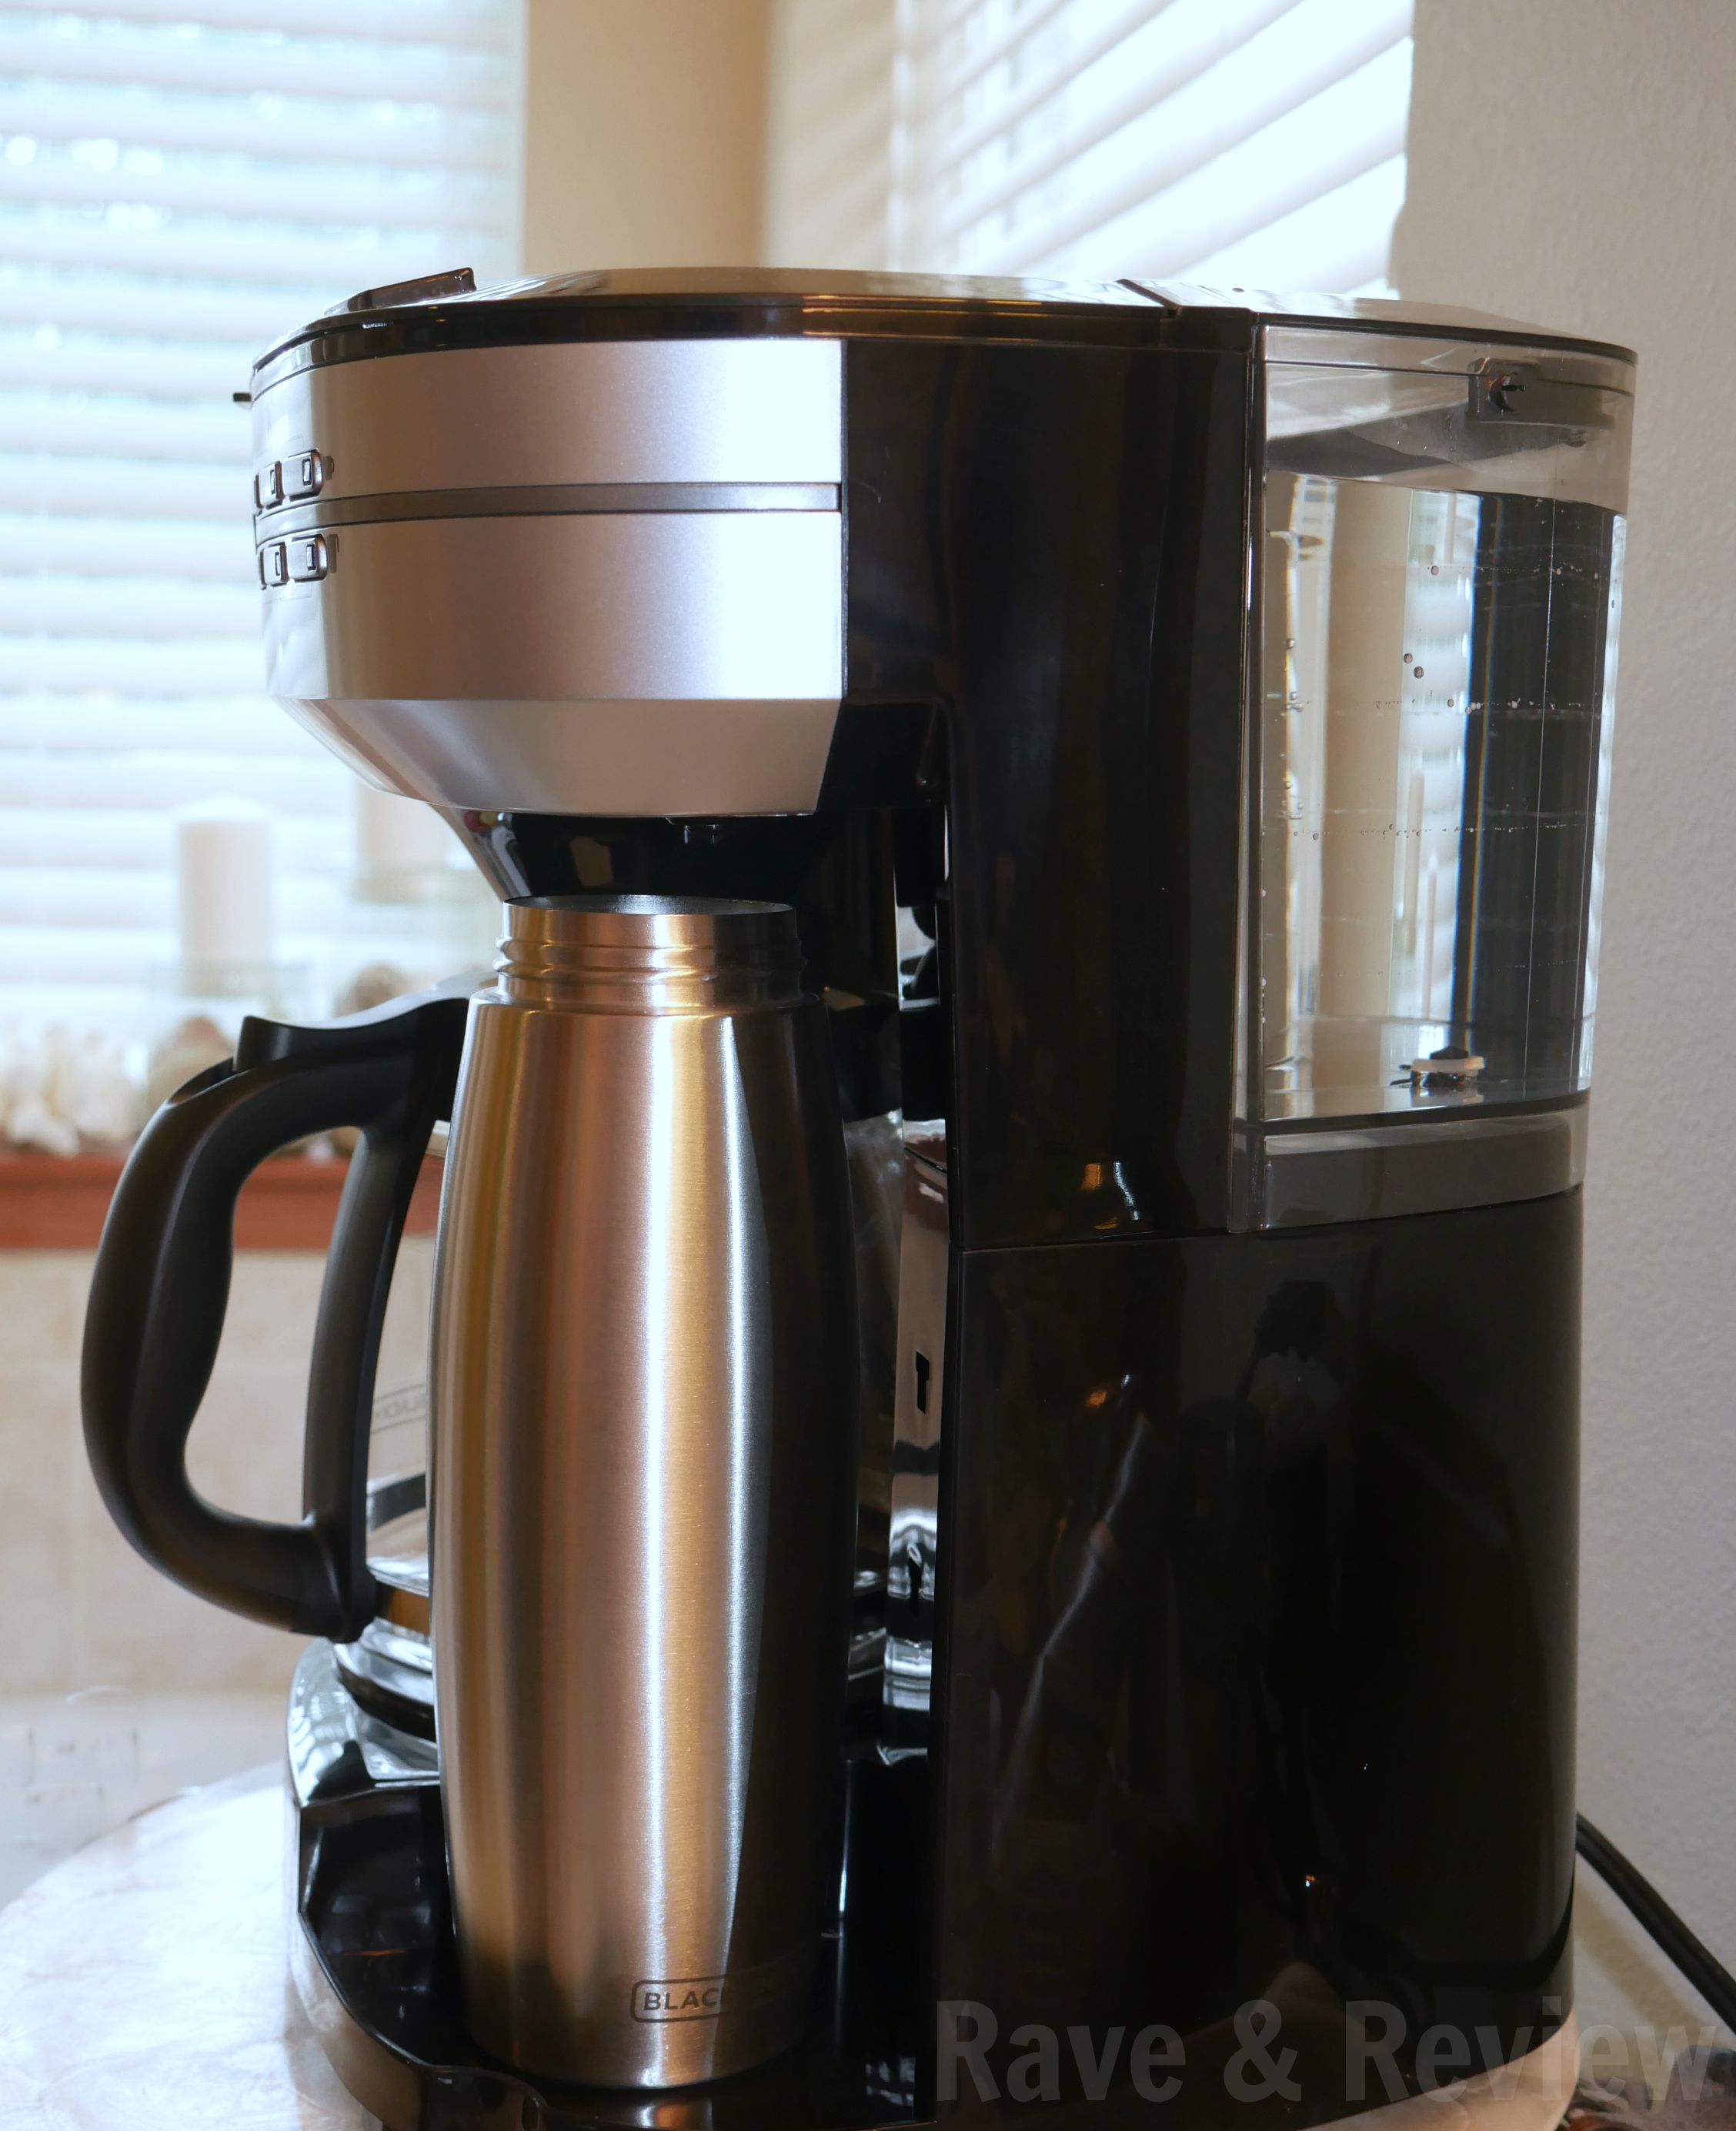 Two coffemakers in one: BLACK + DECKER Café Select Dual Brew